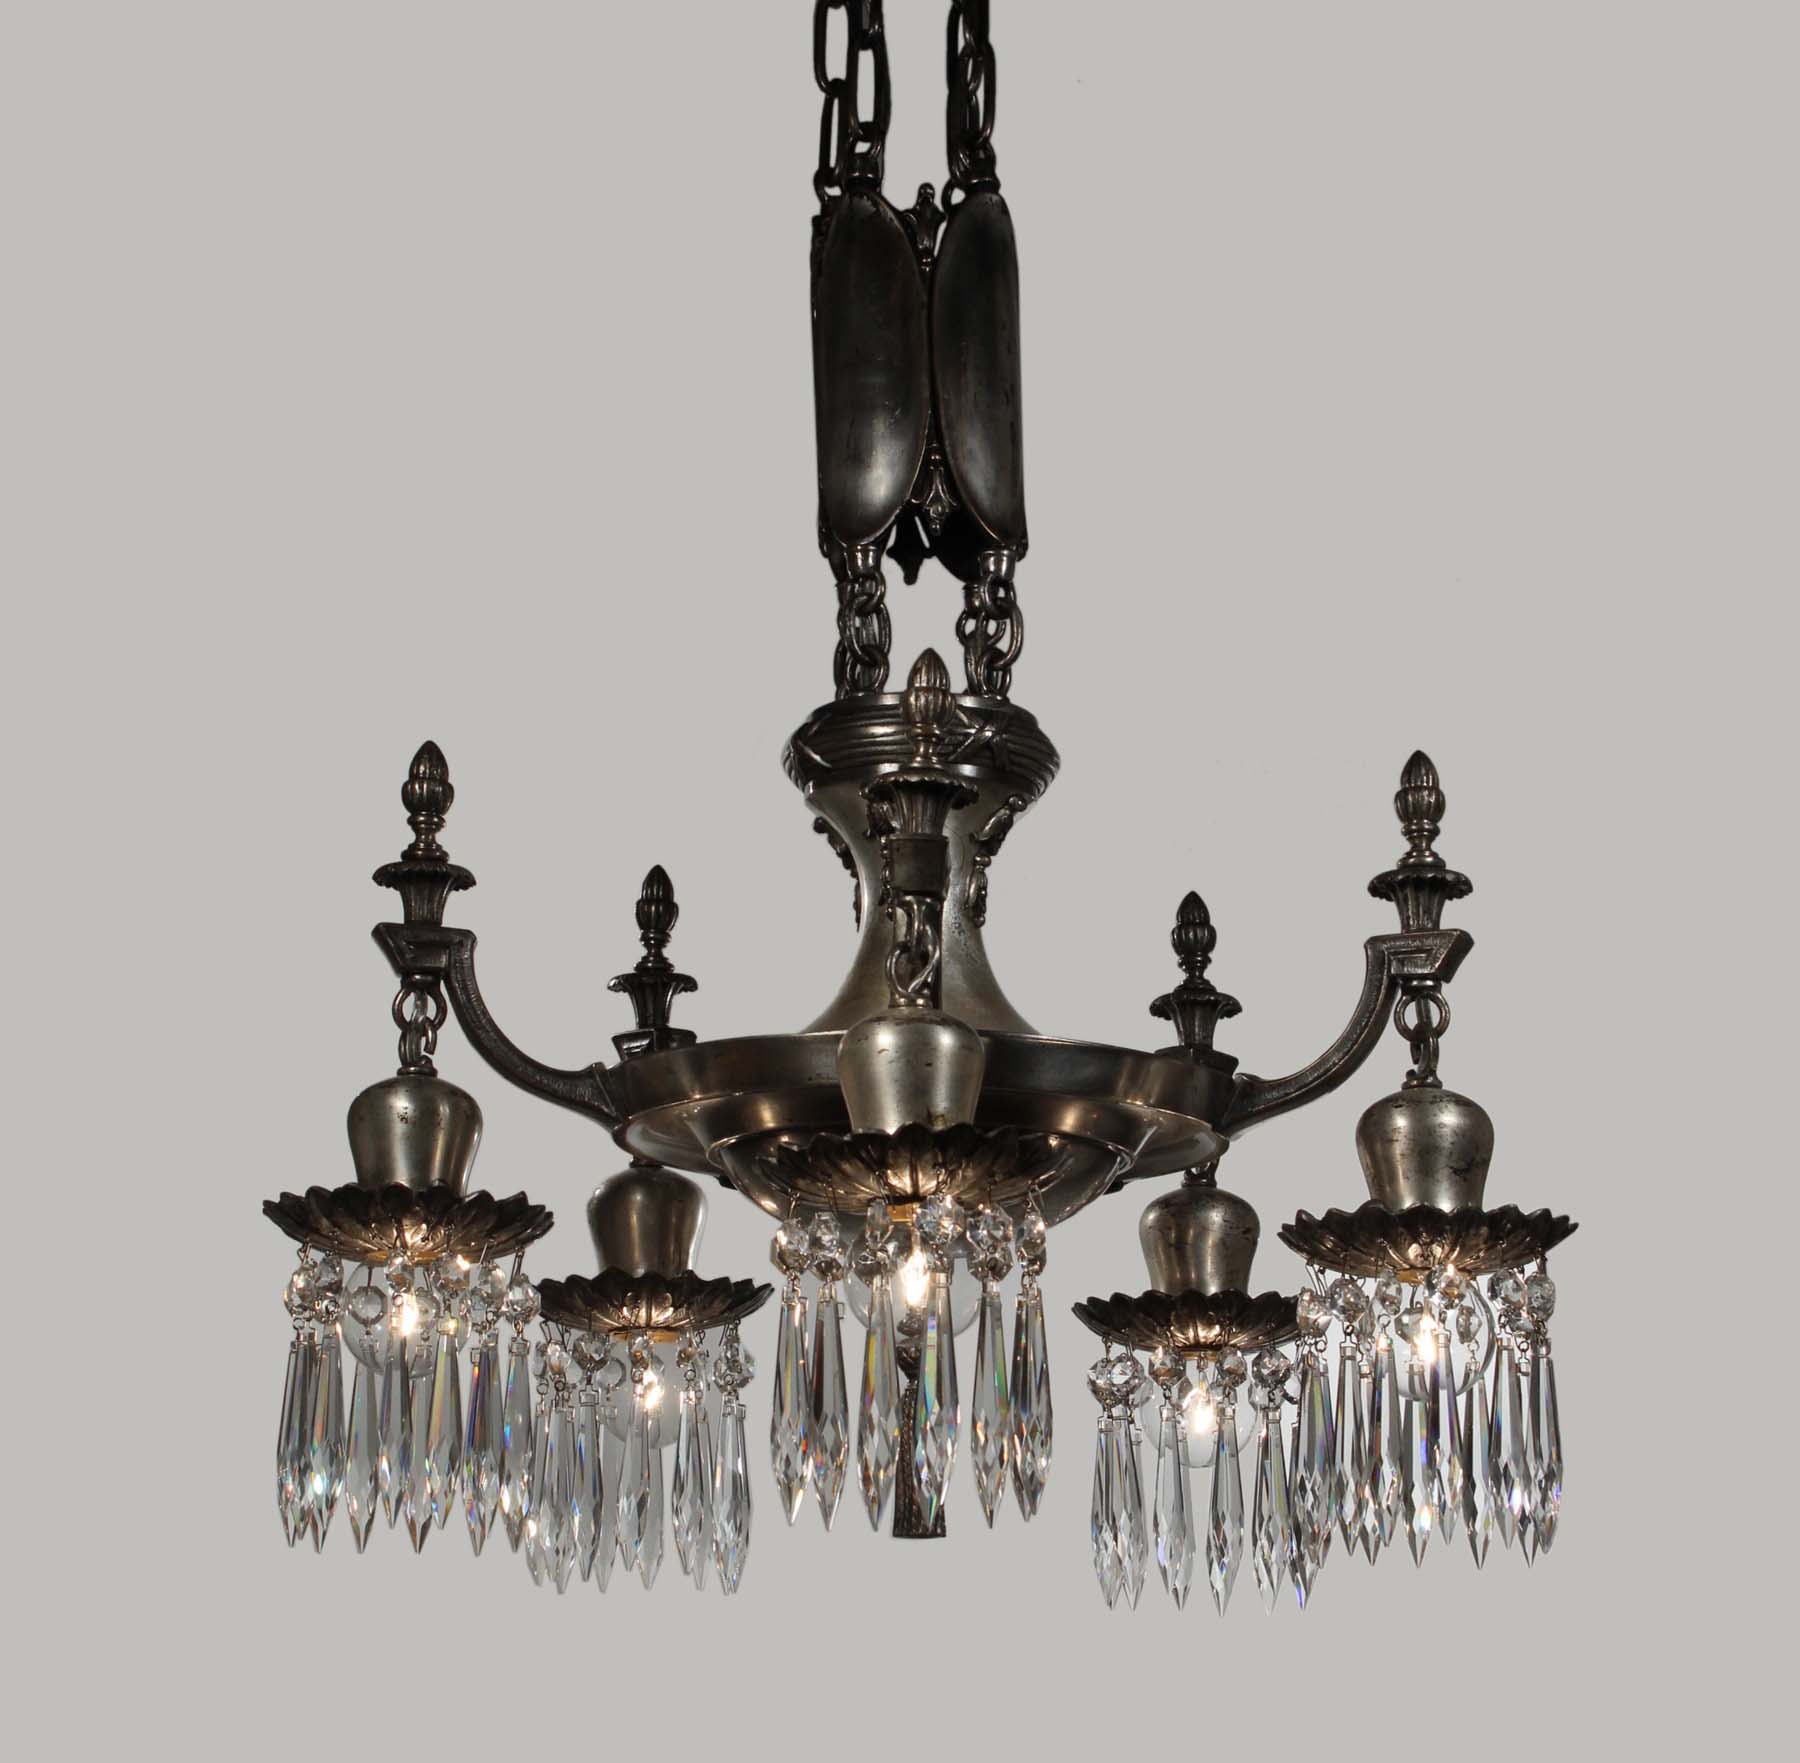 SOLD Antique Neoclassical Silver Plated Chandelier with Prisms-68306